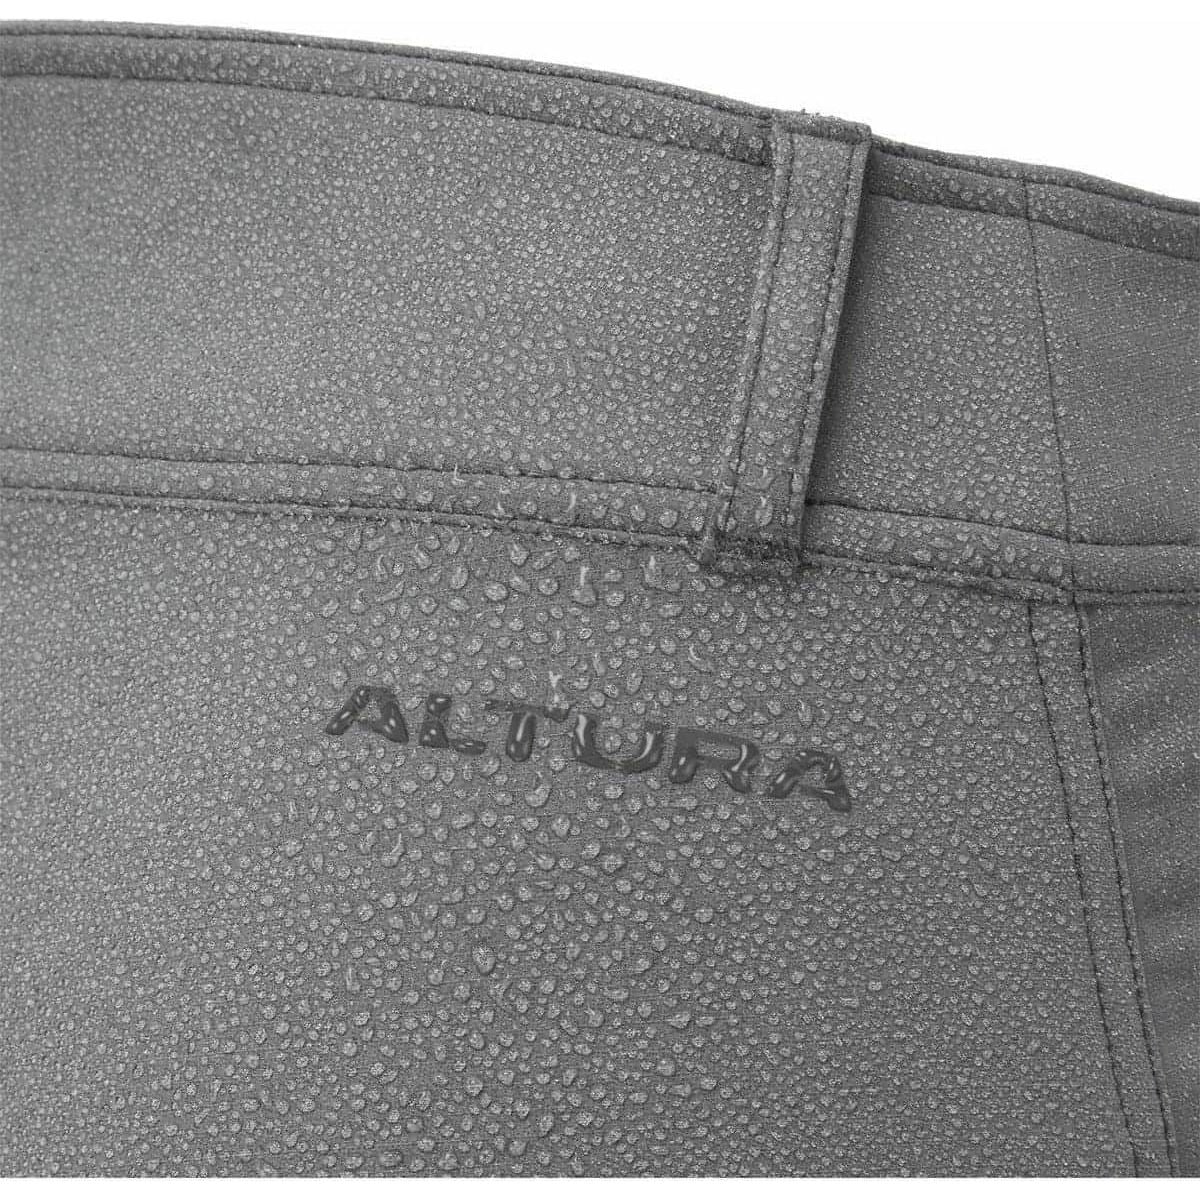 Altura All Roads Repel Womens Cycling Shorts - Grey - Start Fitness